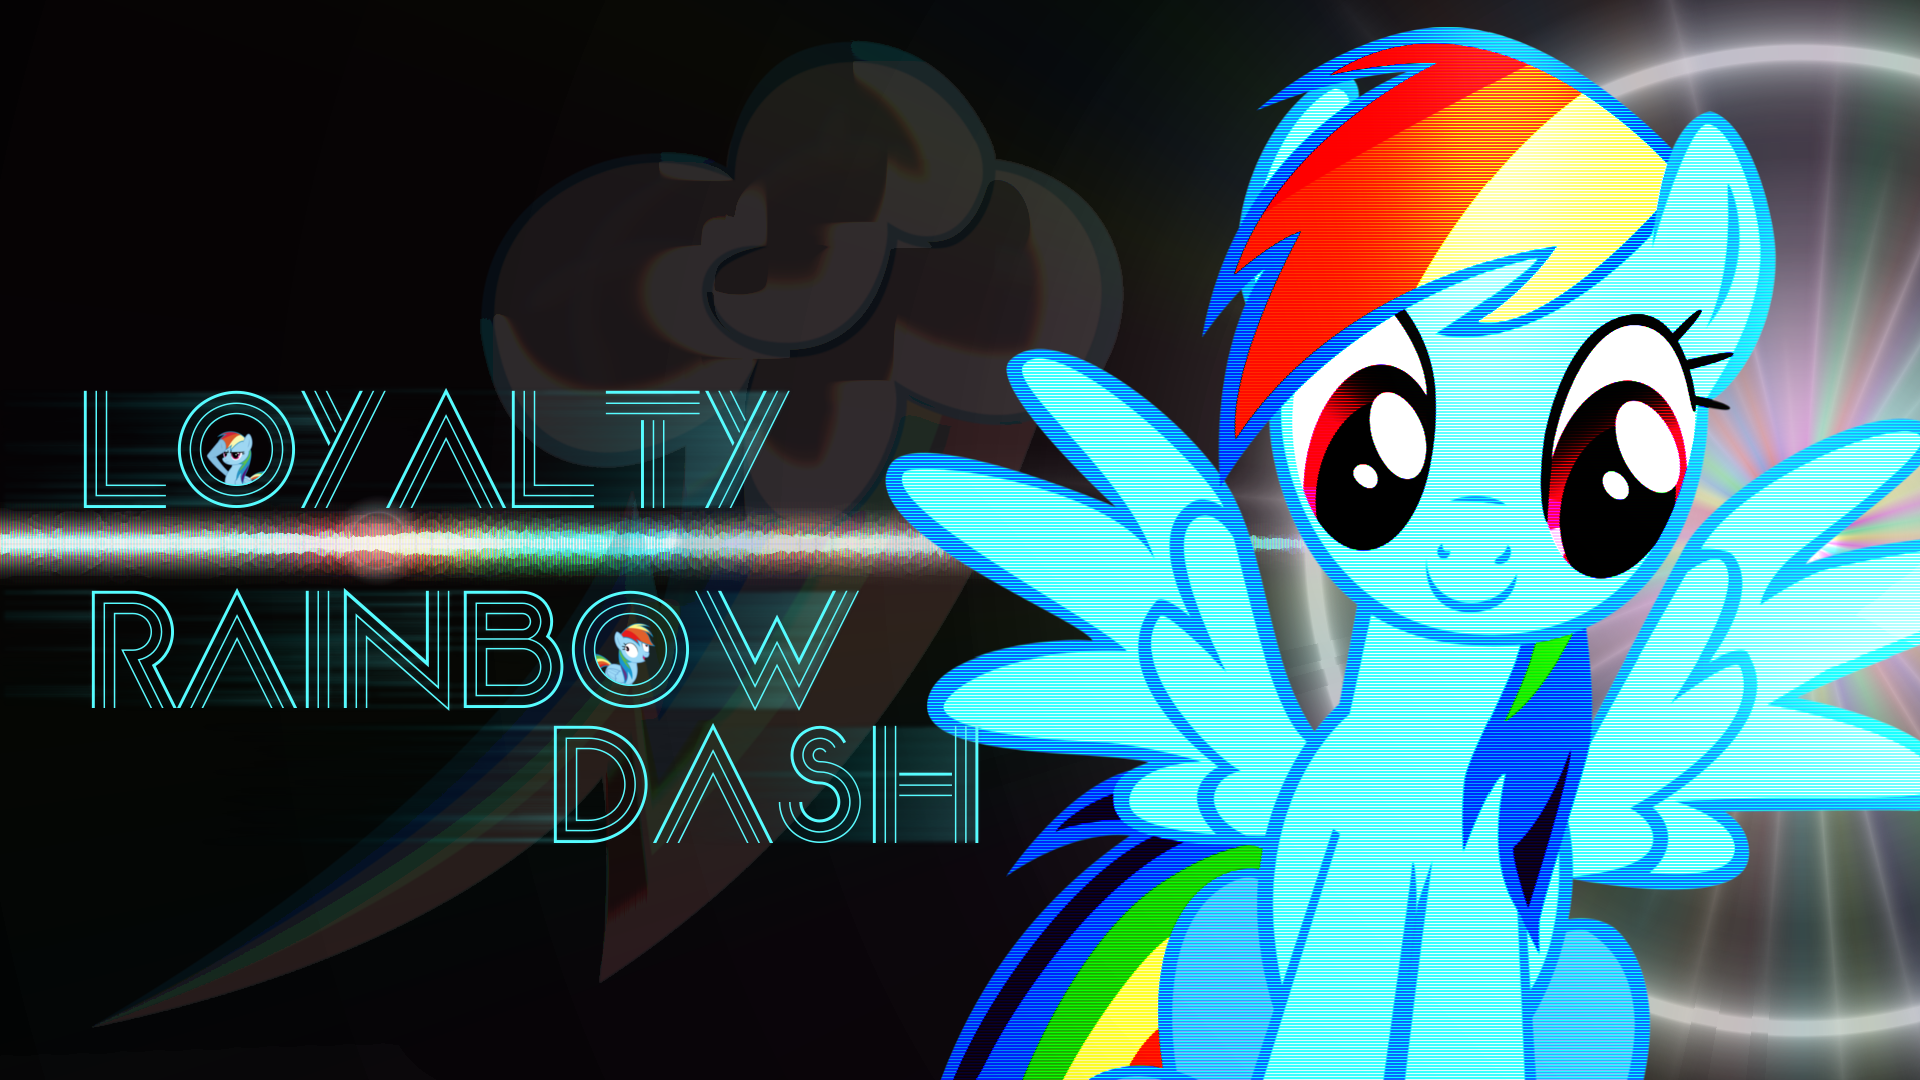 Shiny-shiny pretty lights wallpaper pack. by AtomicGreymon, BlackGryph0n, Clueless313, kitsuneymg and MoongazePonies